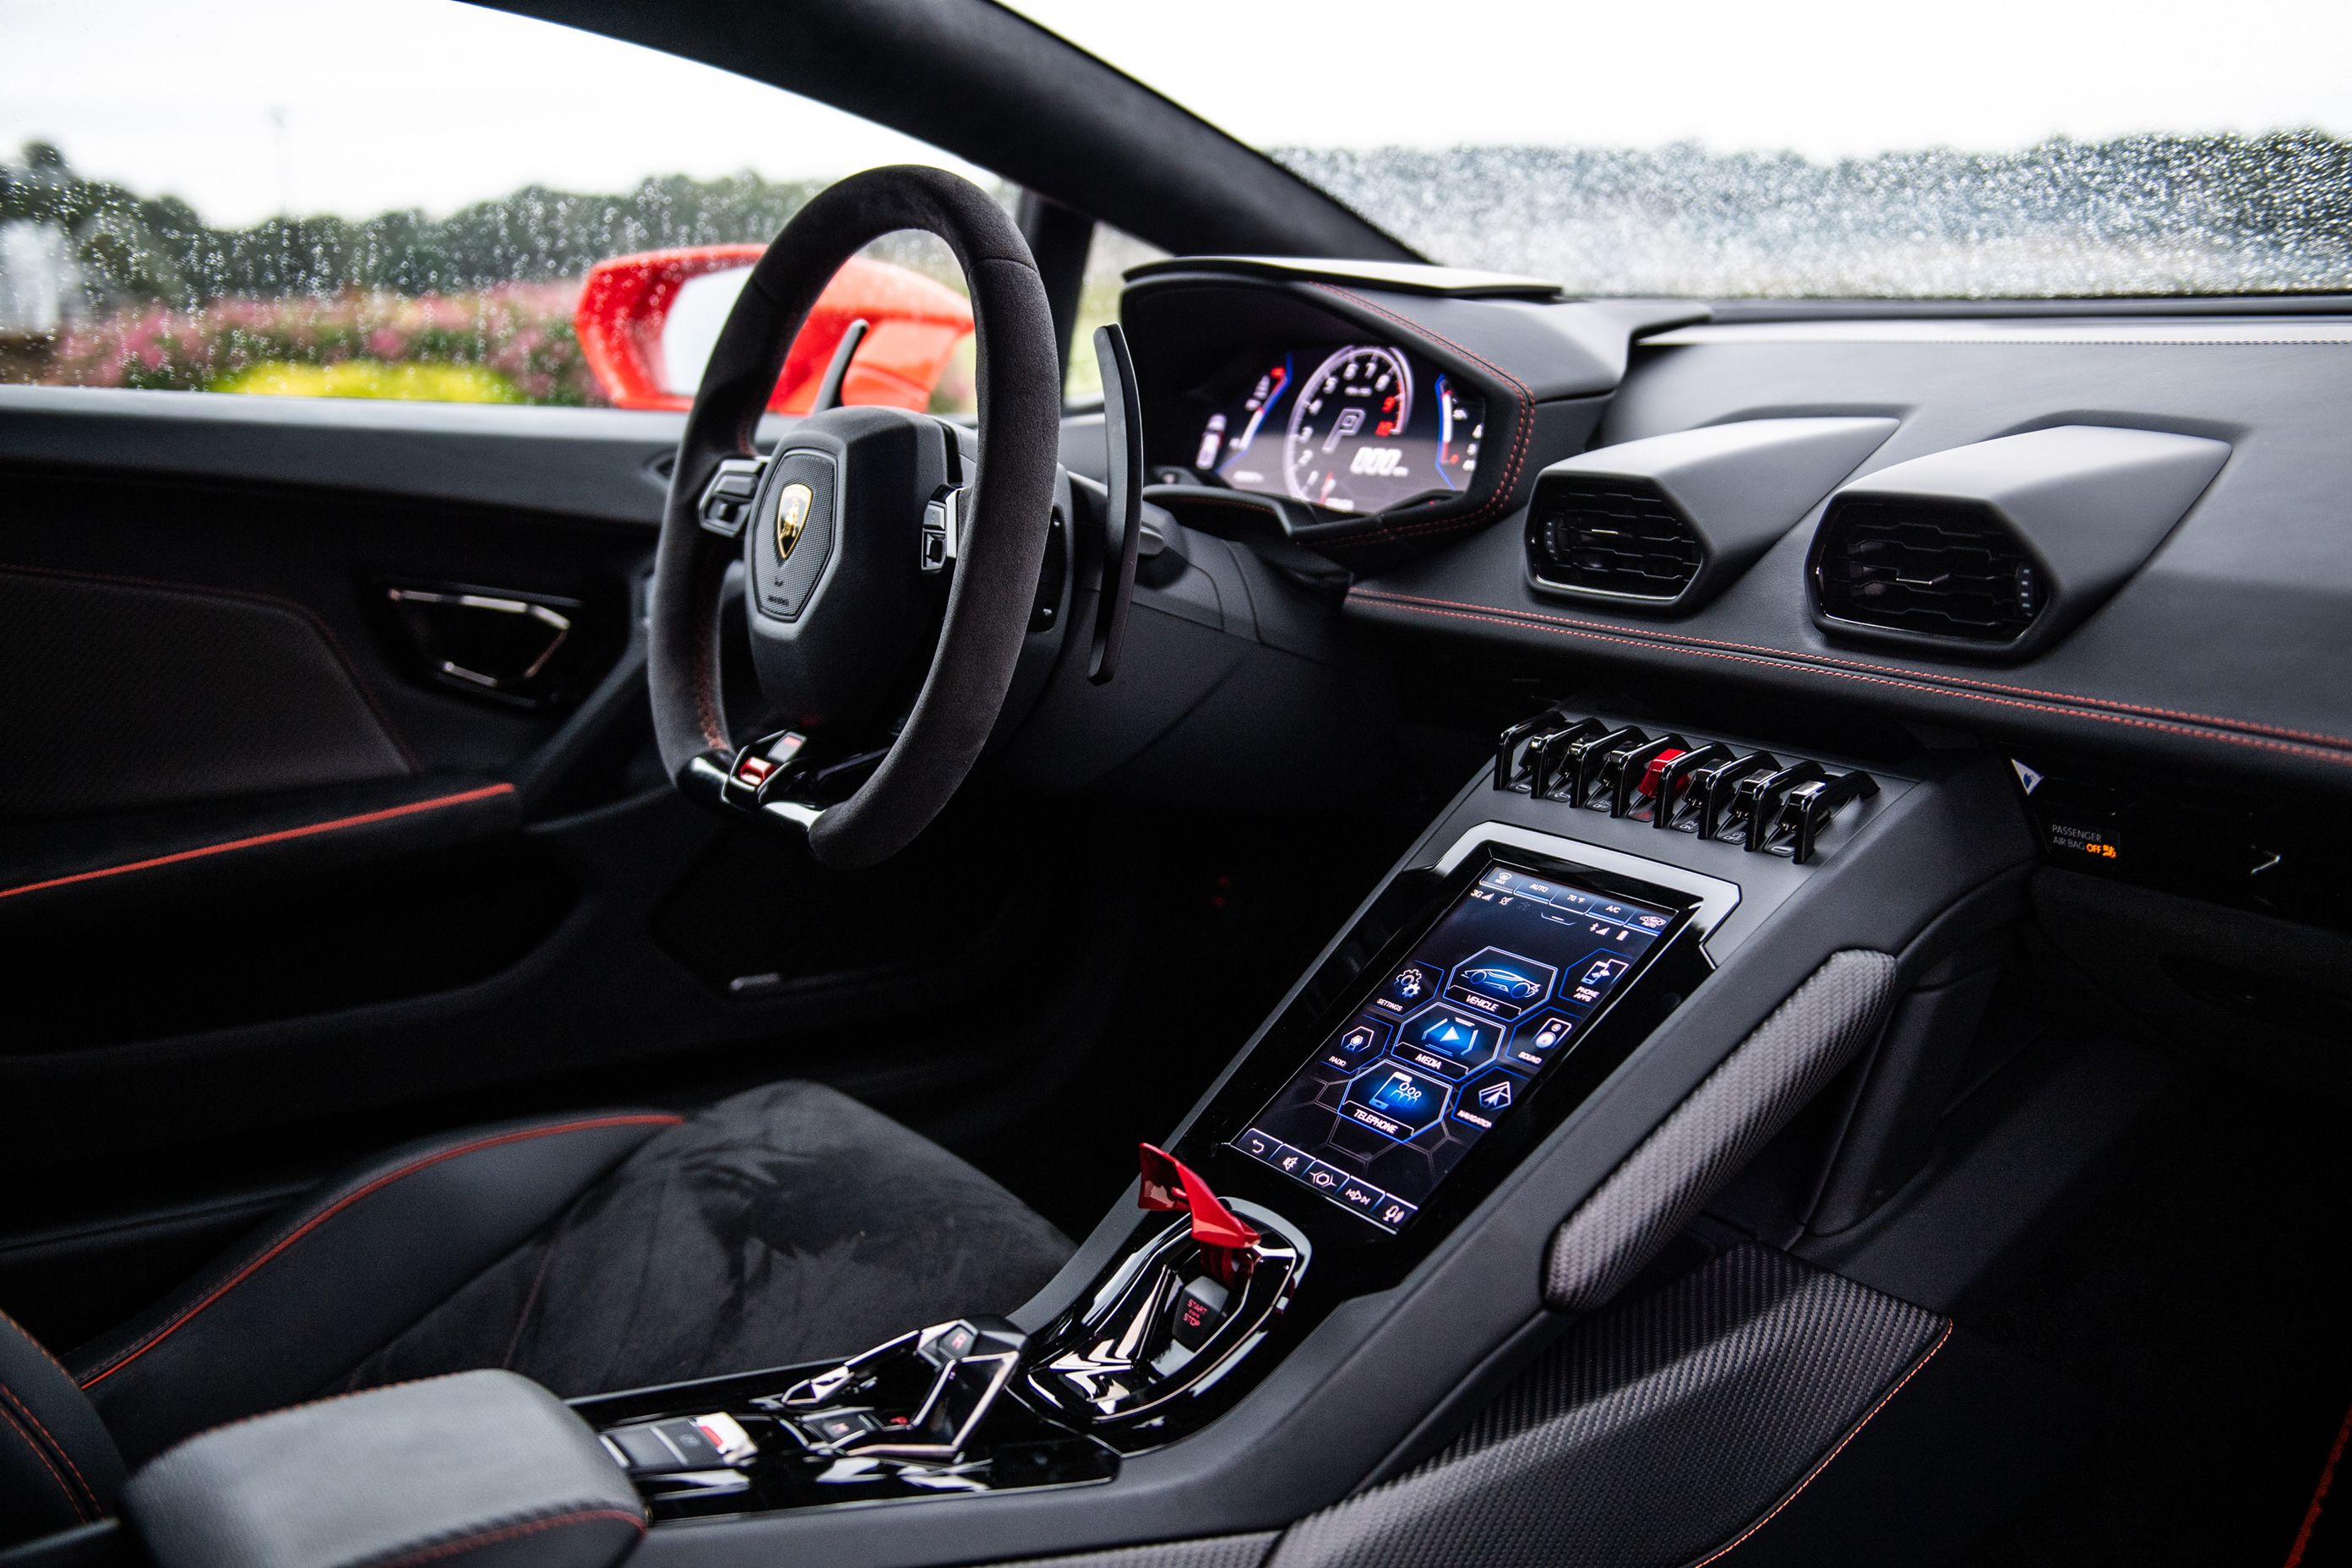 Gallery: A Look Inside and In Detail at the Lamborghini Huracan Evo